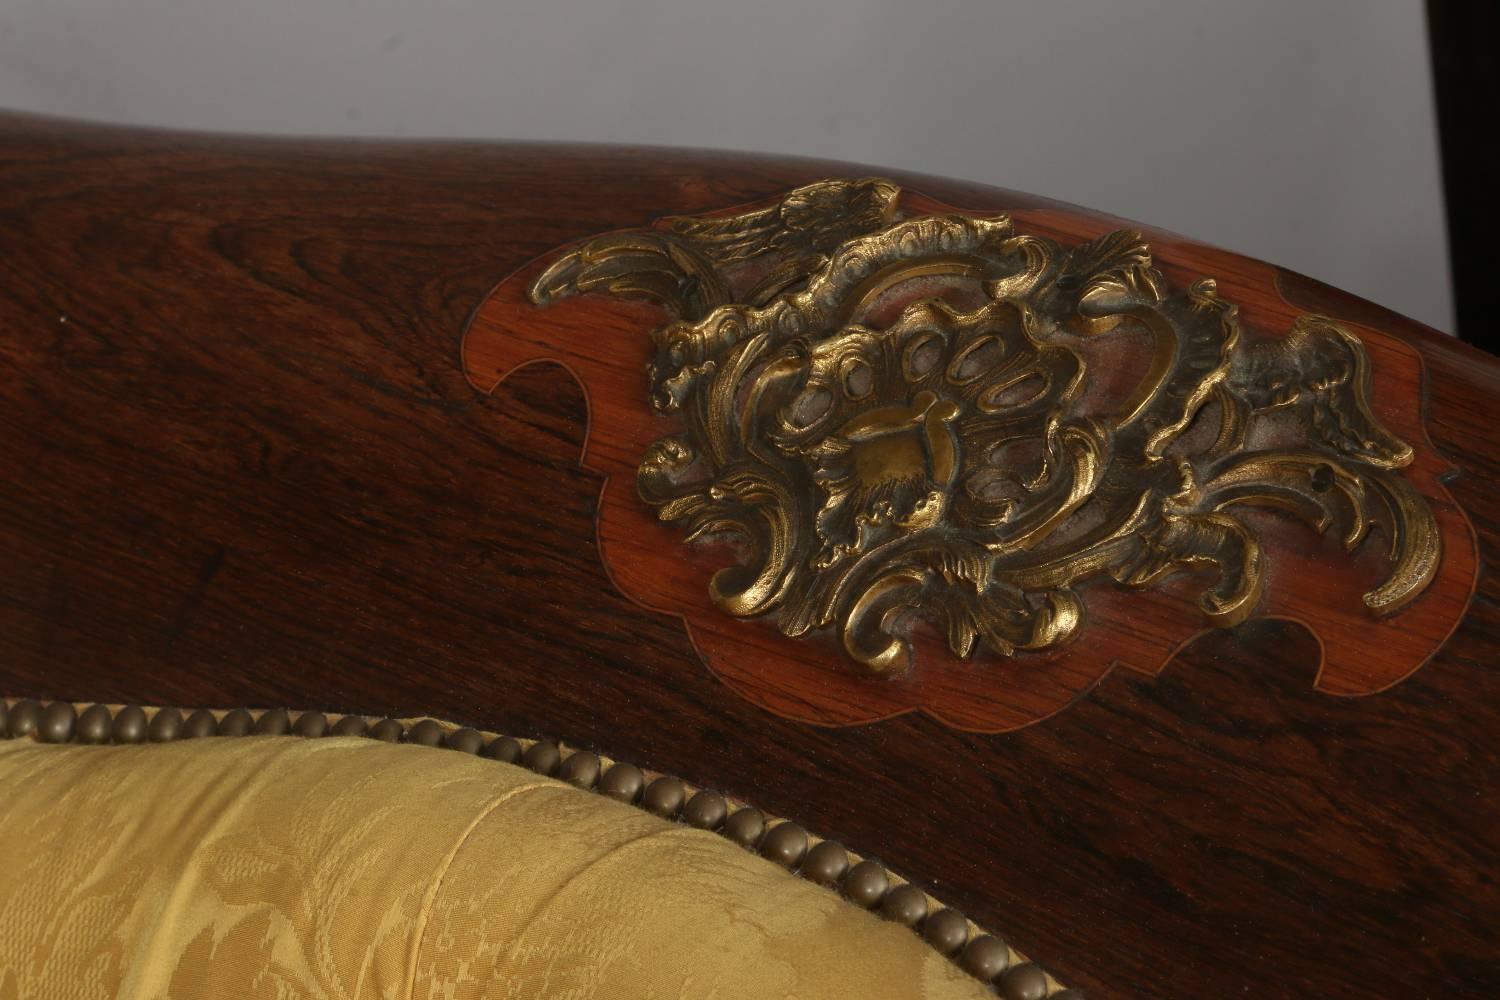 Stunningly beautiful Napoleonic First Empire Lit en Bateau Louis XV style 19th century French rosewood sleigh daybed circa 1815, upholstered in deep buttoned and damascened gold silk, coss banded in Satinwood and with Ormolu mounts, with a single